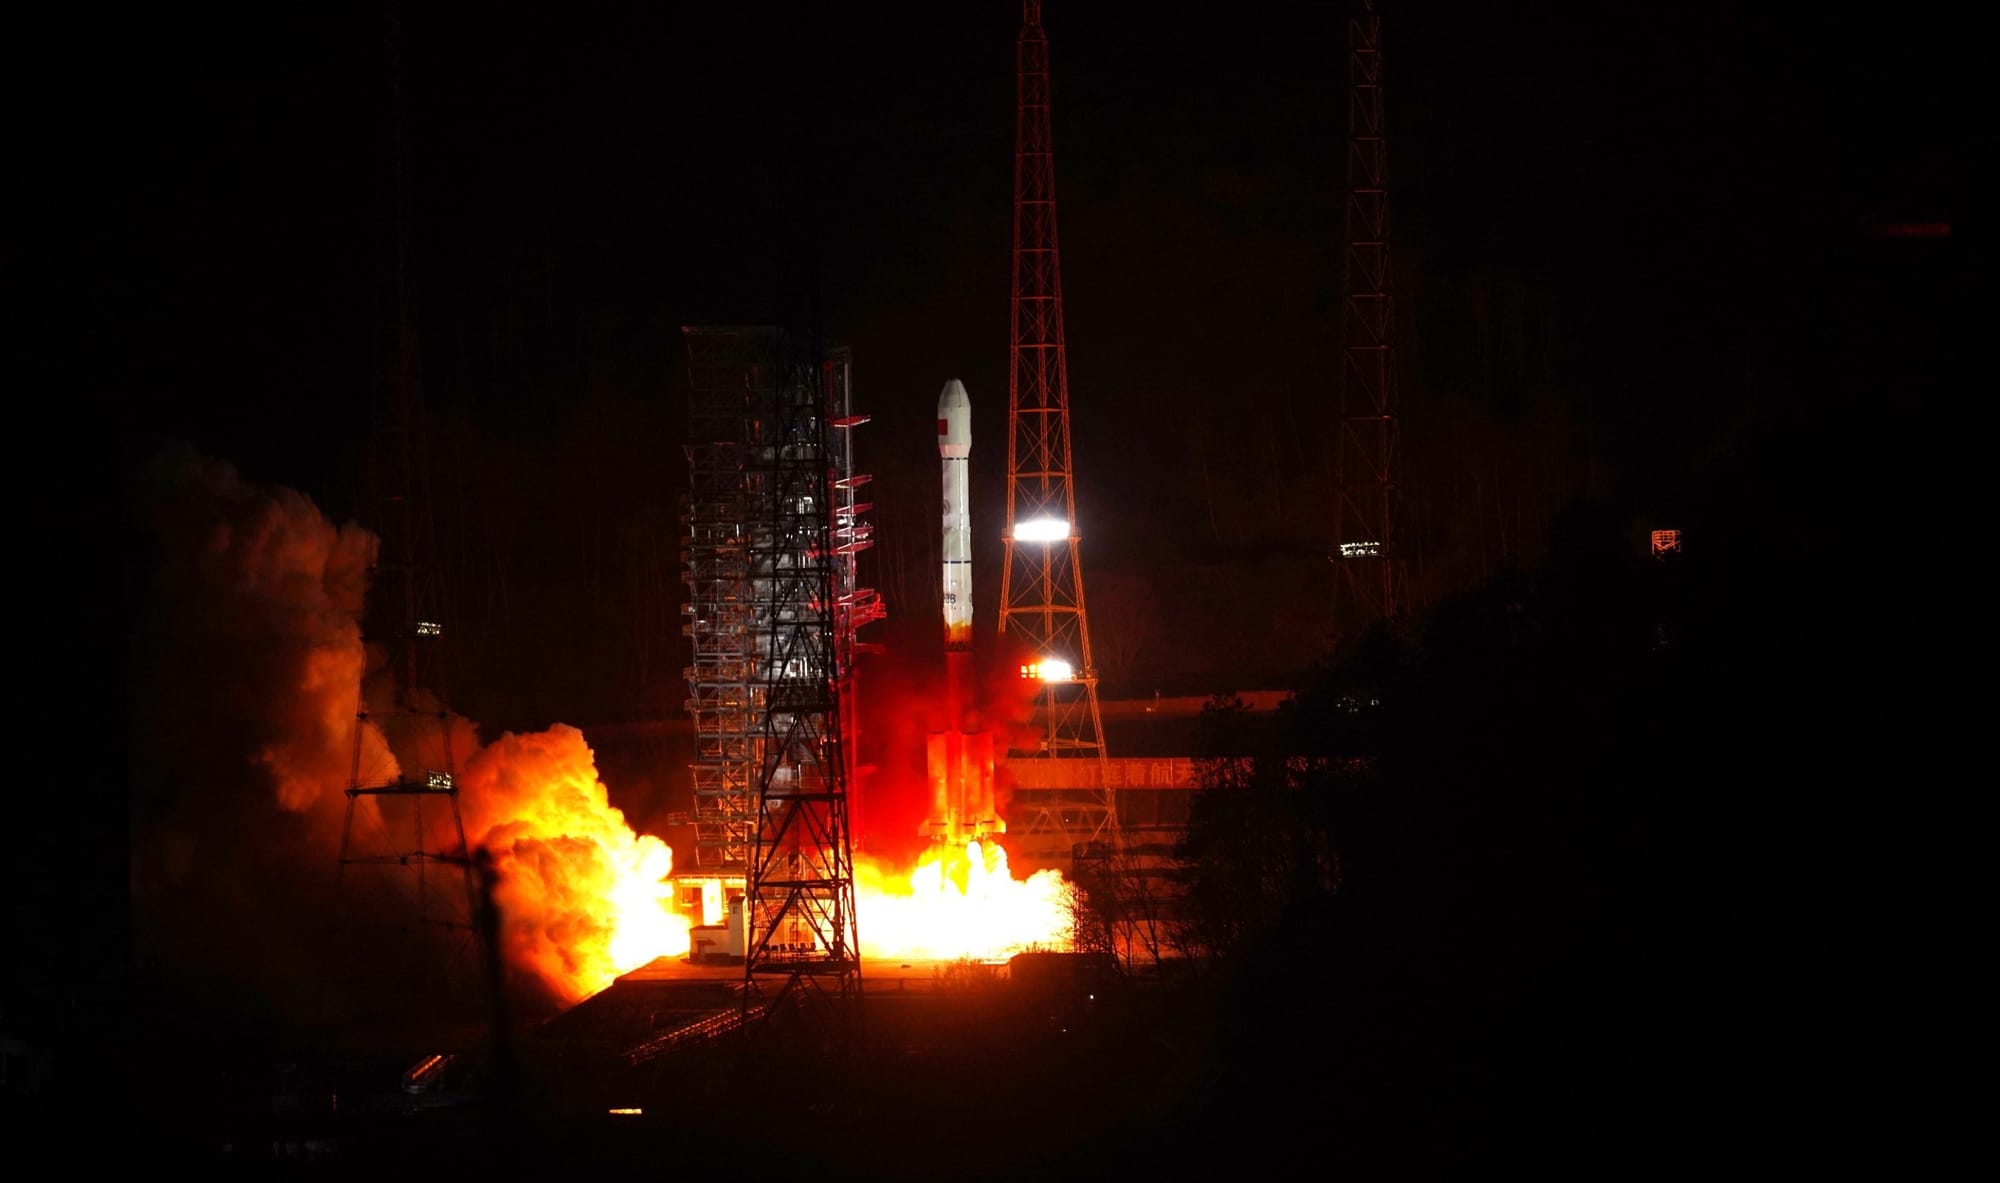 The Long March 3B/E Y95 rocket lifting off from Xichang Satellite Launch Center. ©Xiao Xinjiang/China Central Television